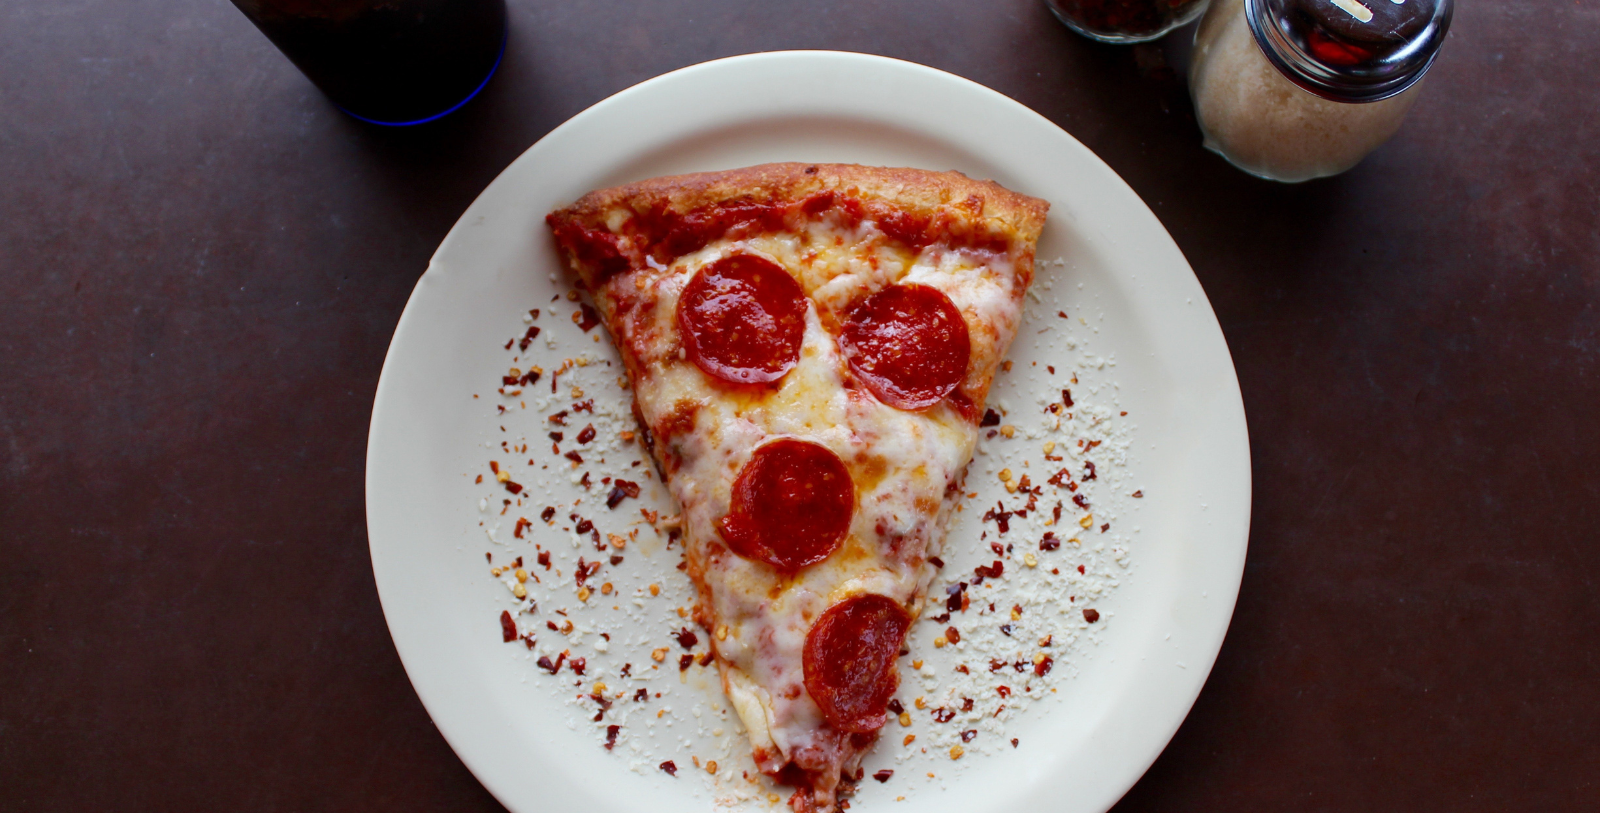 Taste an iconic “bagel and shmear” or dollar-slice, thin crust New York pizza while sightseeing.